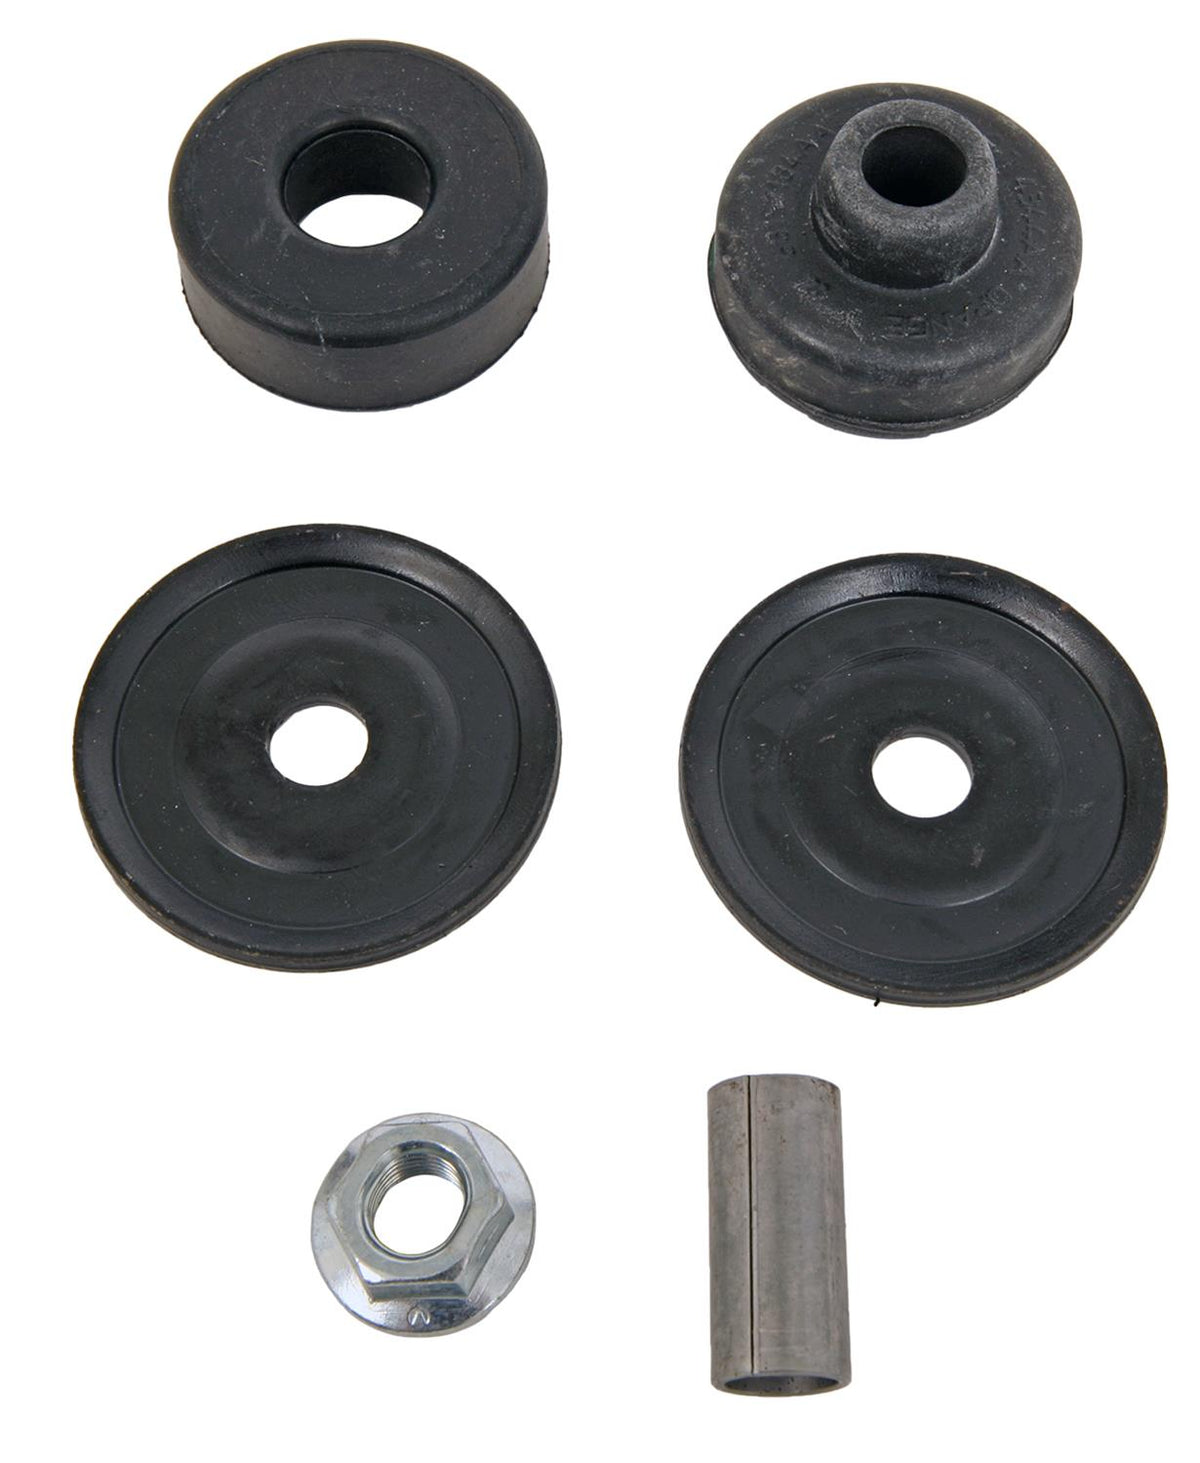 Bilstein B1 (Components) Replacement Bushing Kits